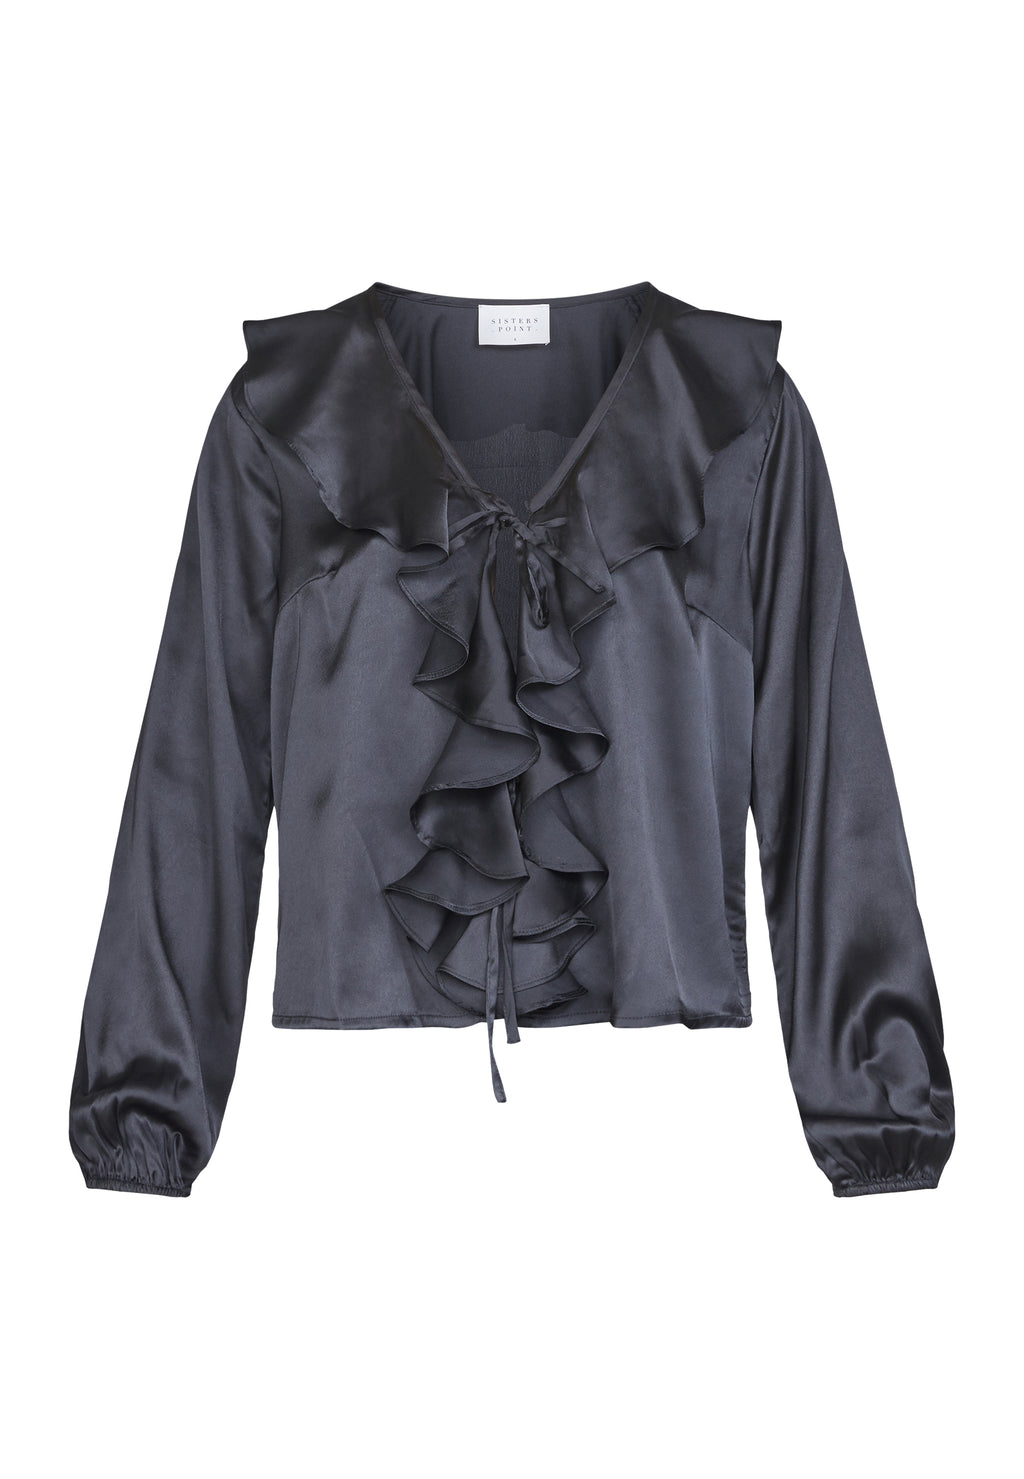 SistersPoint Edgy black blouse